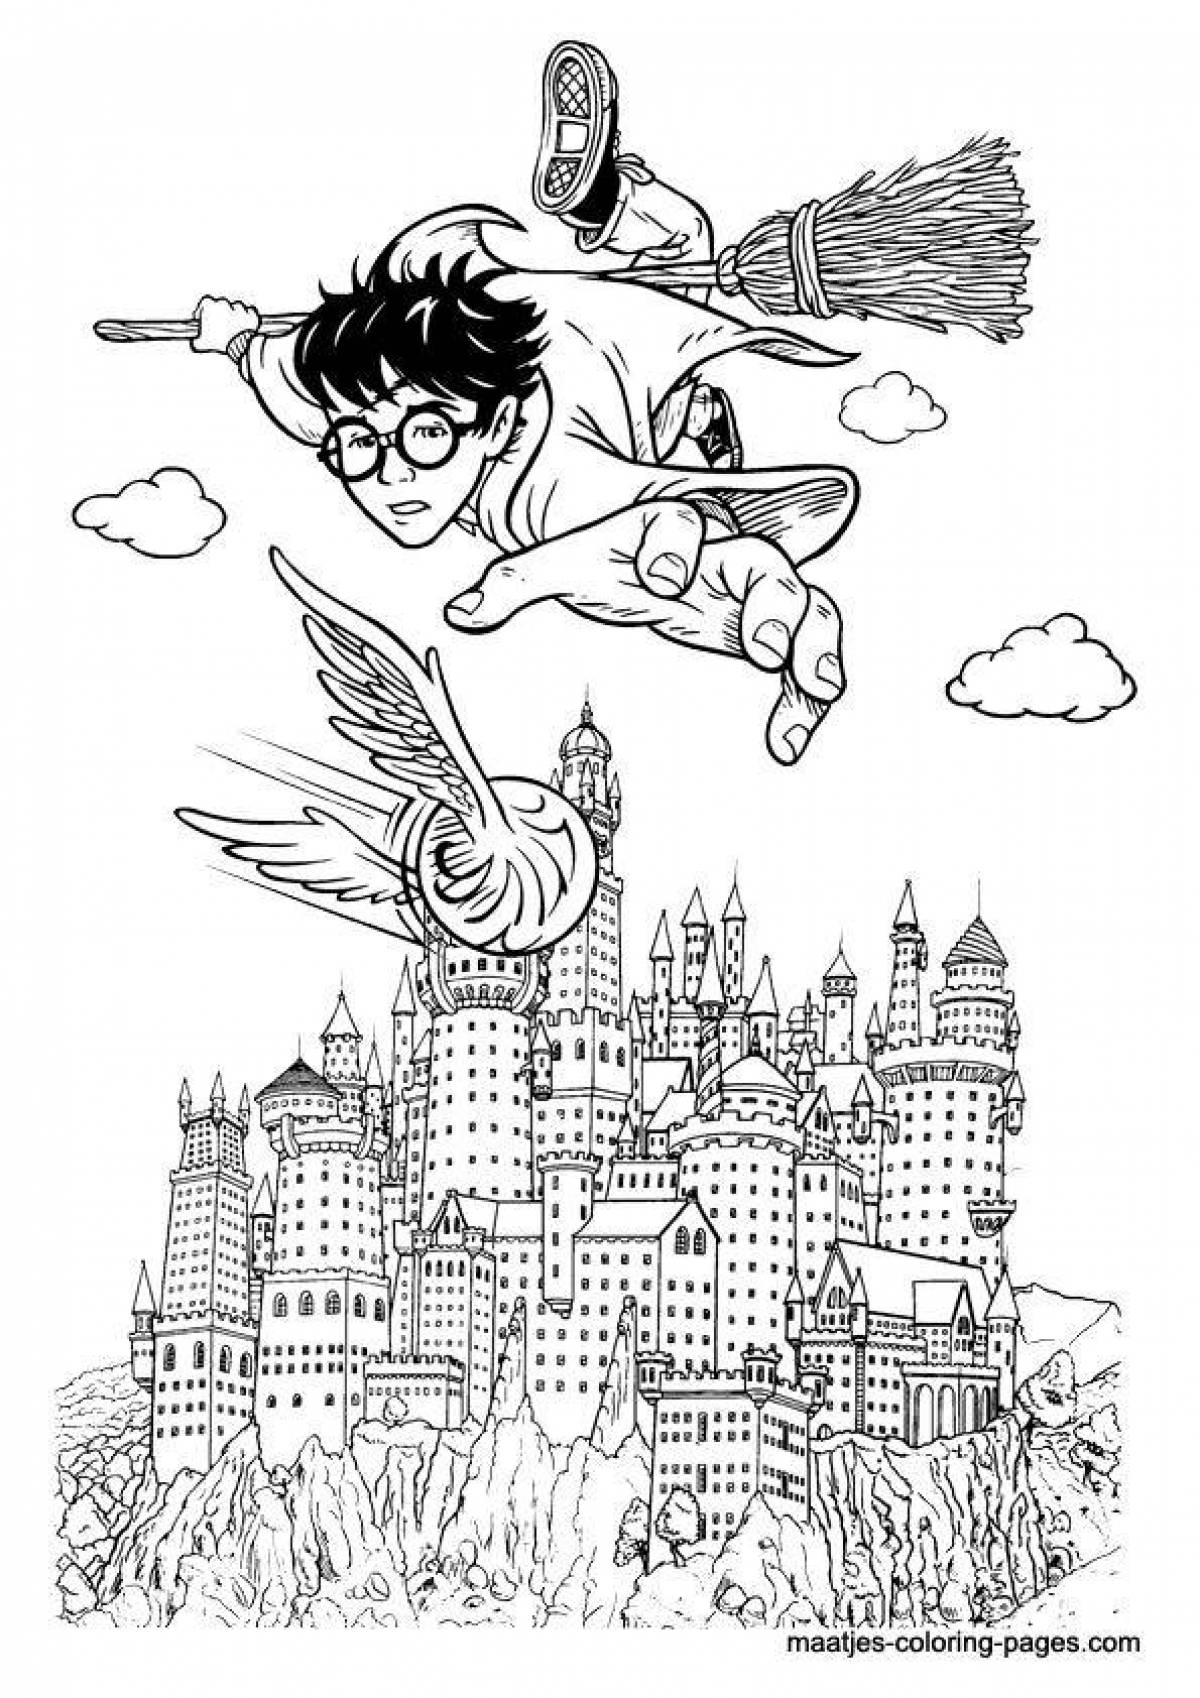 Fancy coloring harry potter and the philosopher's stone